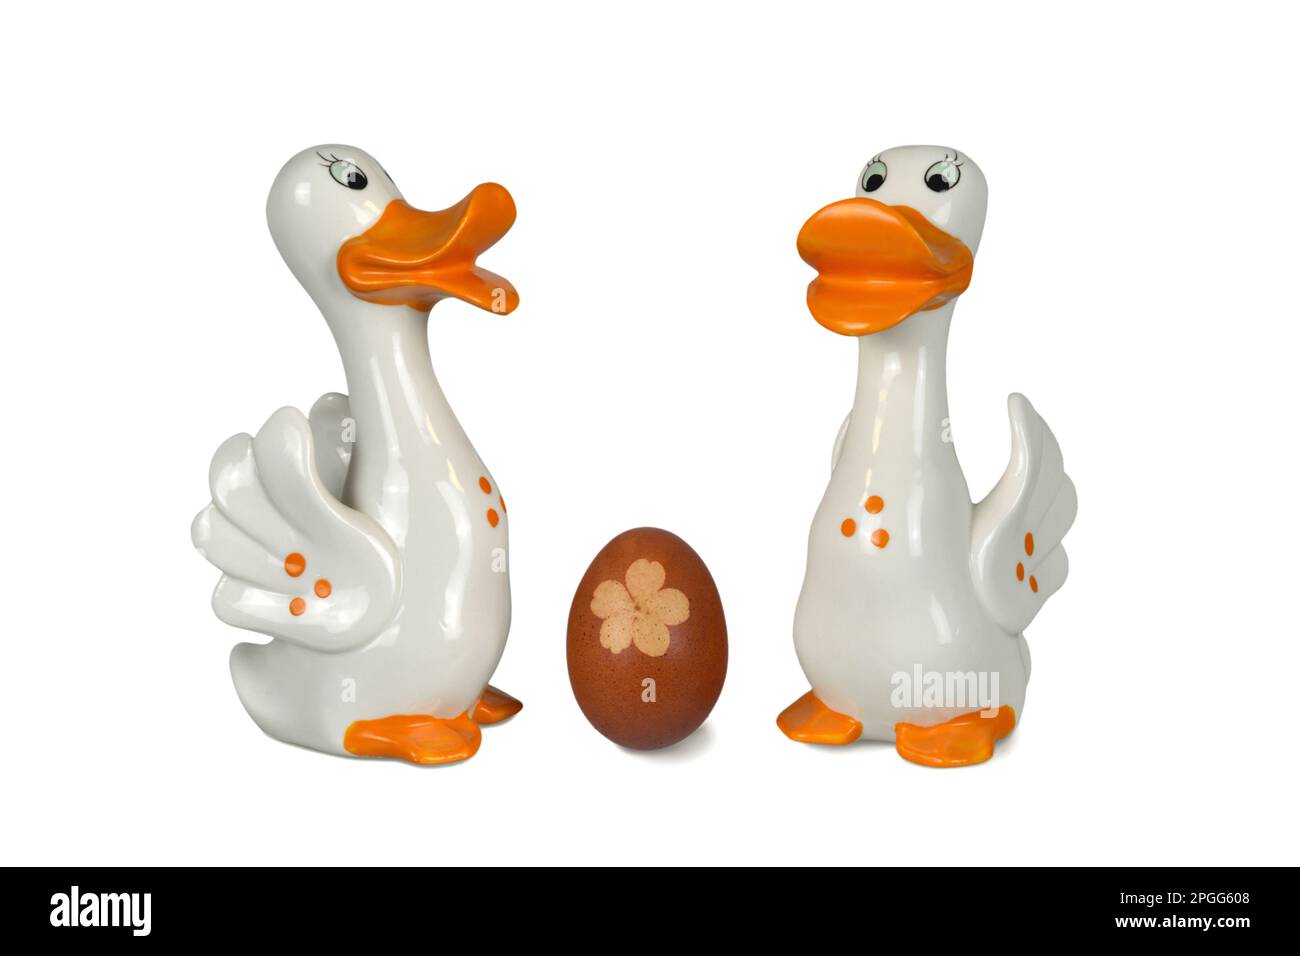 Easter decoration isolated on white background. Duck figurines and natural dyed Easter egg. Stock Photo